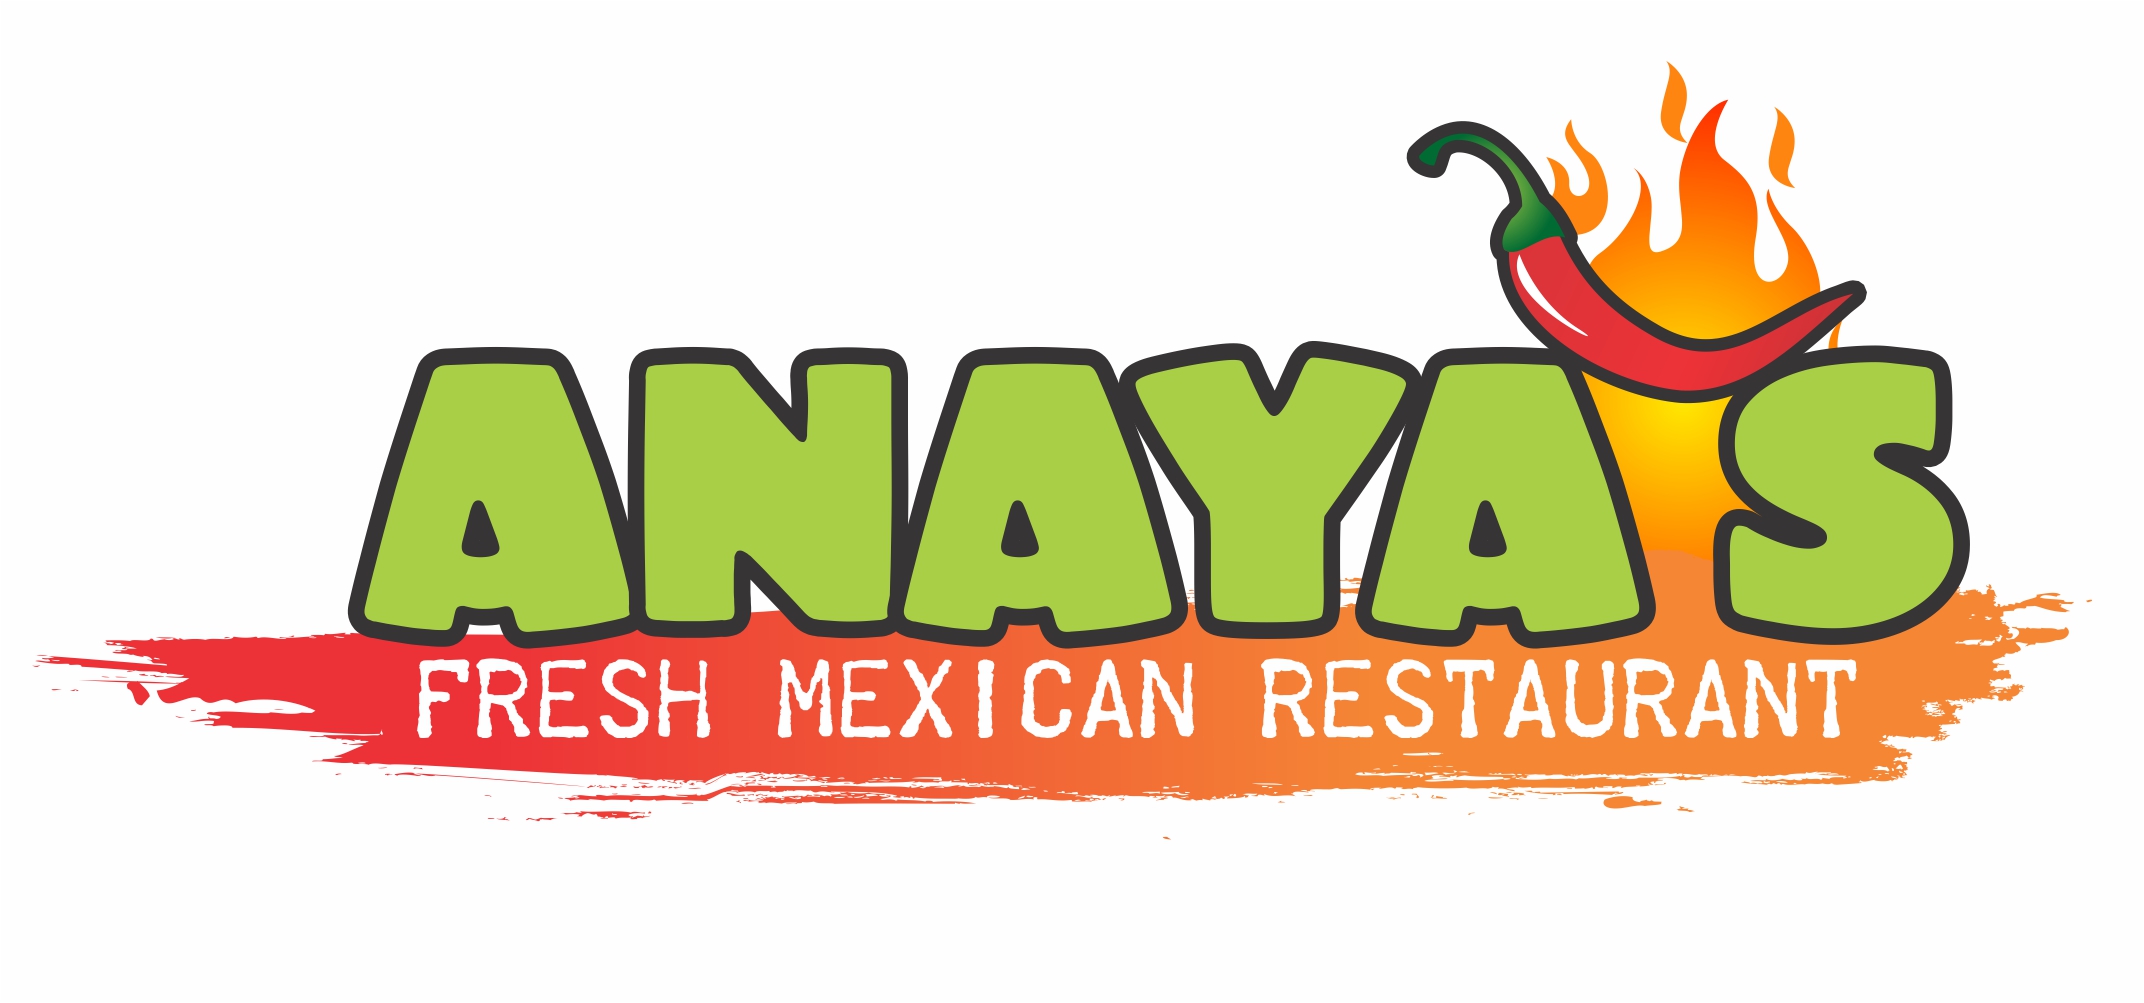 About Anaya’s Fresh Mexican Restaurant